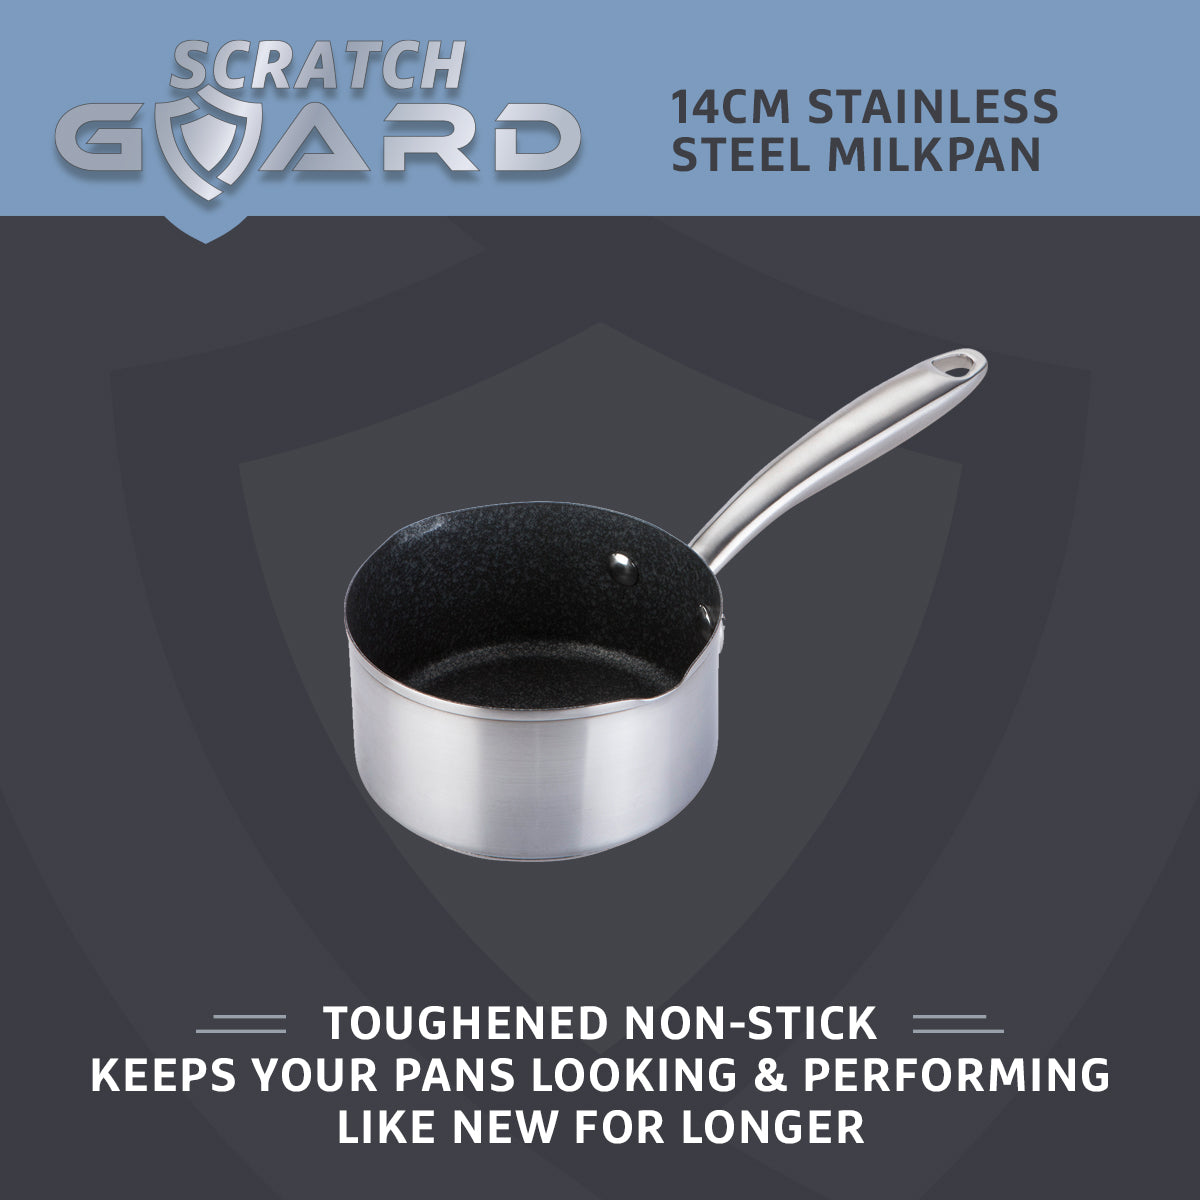 Prestige Scratch Guard Stainless Steel Milkpan, 14cm/0.9L Home and beyond